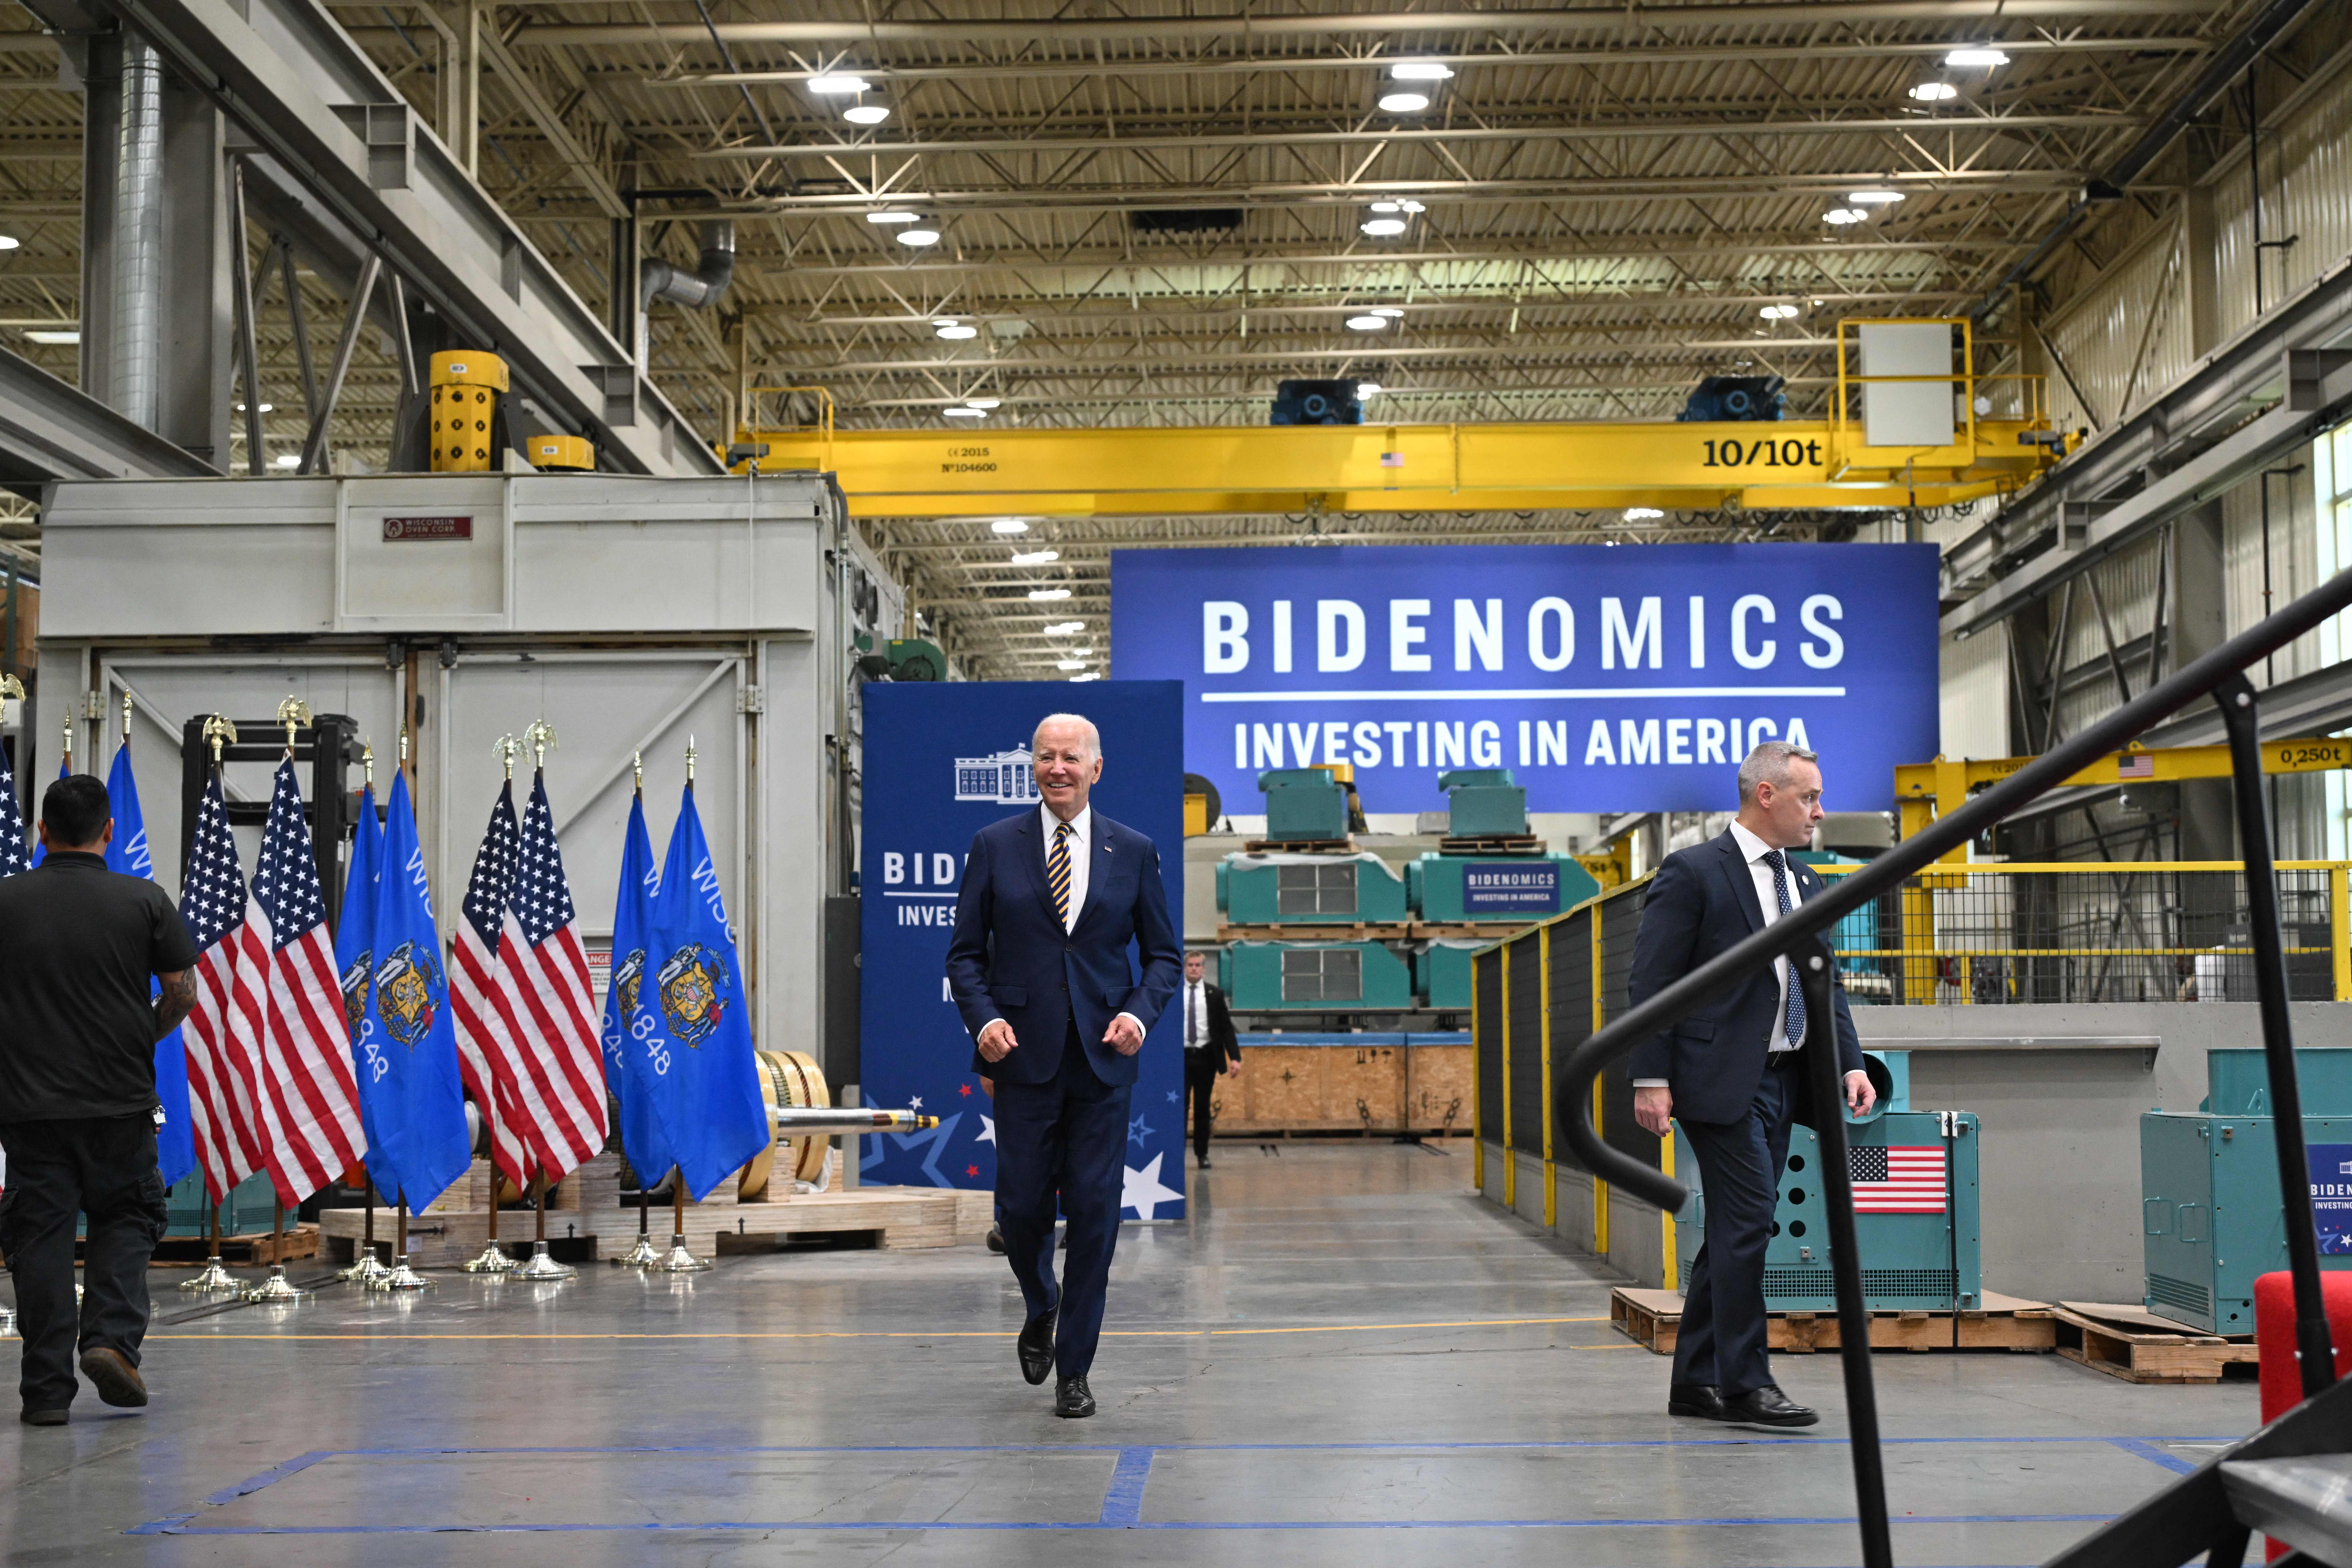 The White House hasn’t convinced people that ‘Bidenomics’ works. So what now?